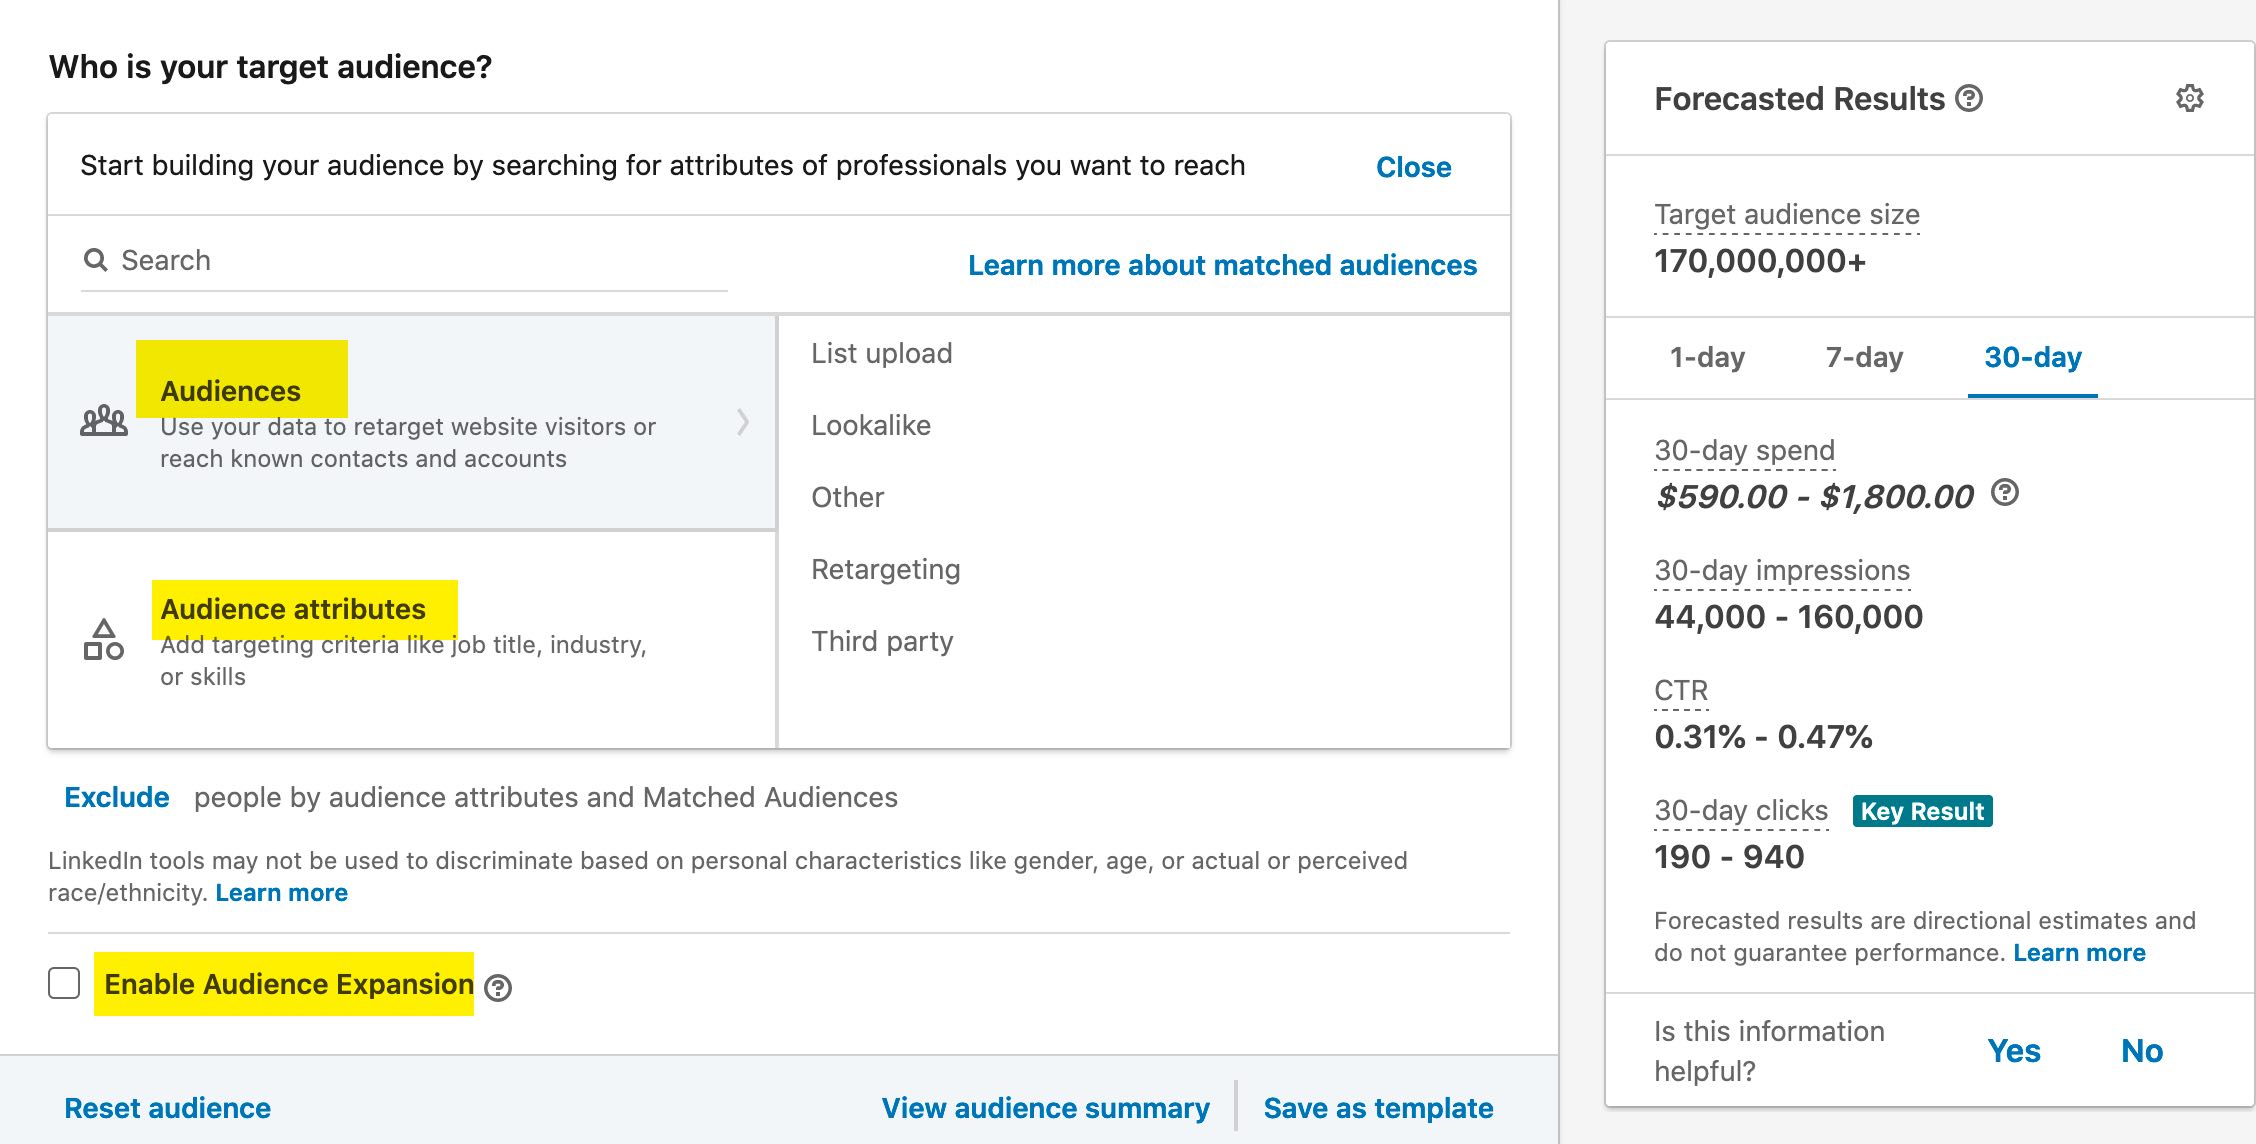 Introduction to LinkedIn Ads: Who is your target audience?